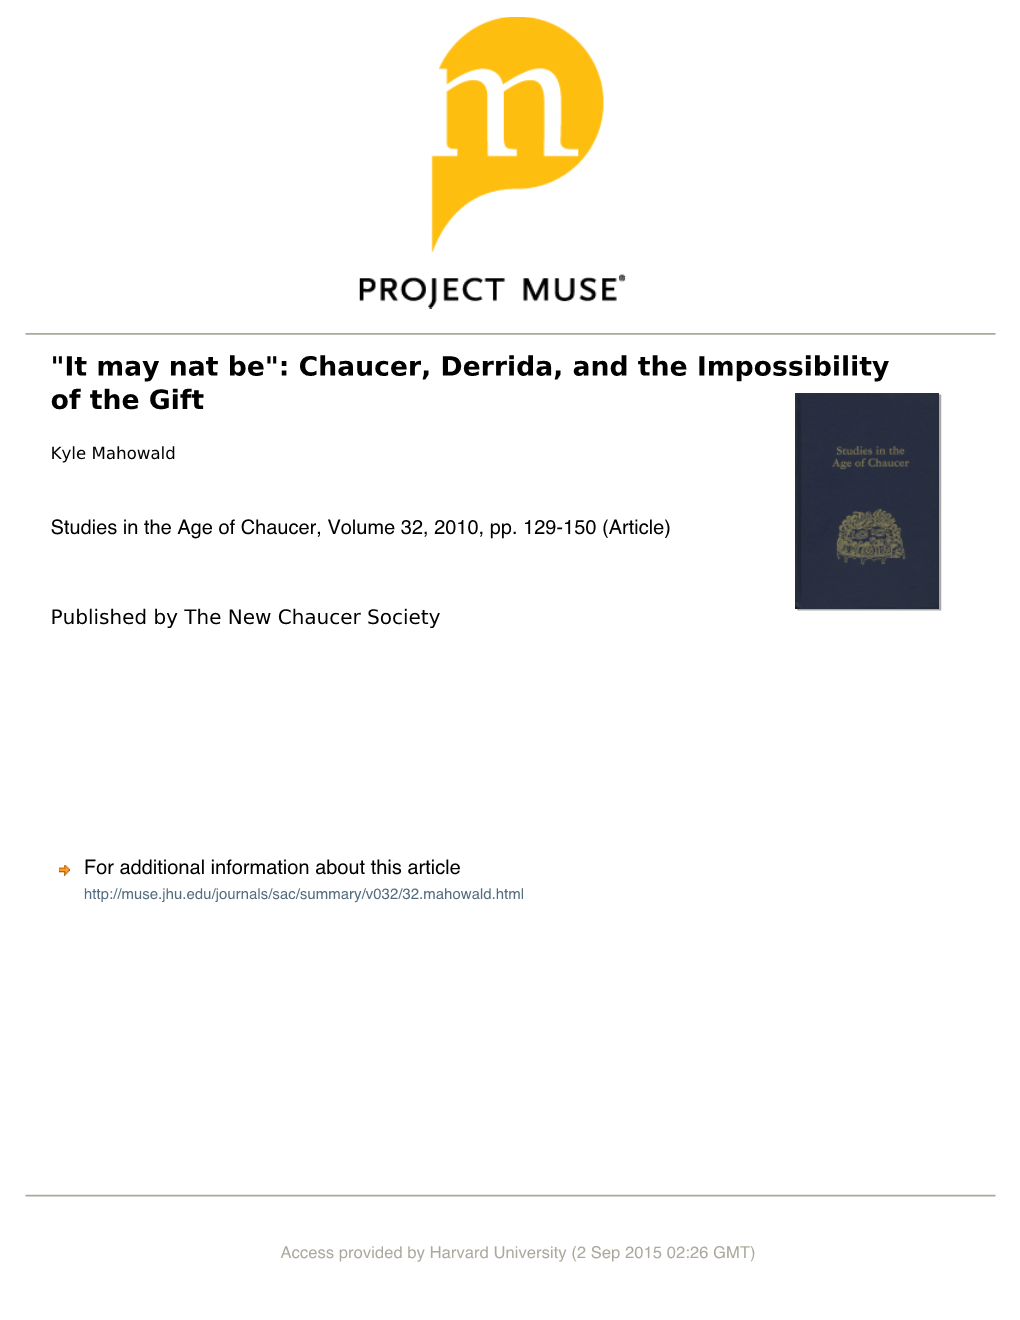 Chaucer, Derrida, and the Impossibility of the Gift